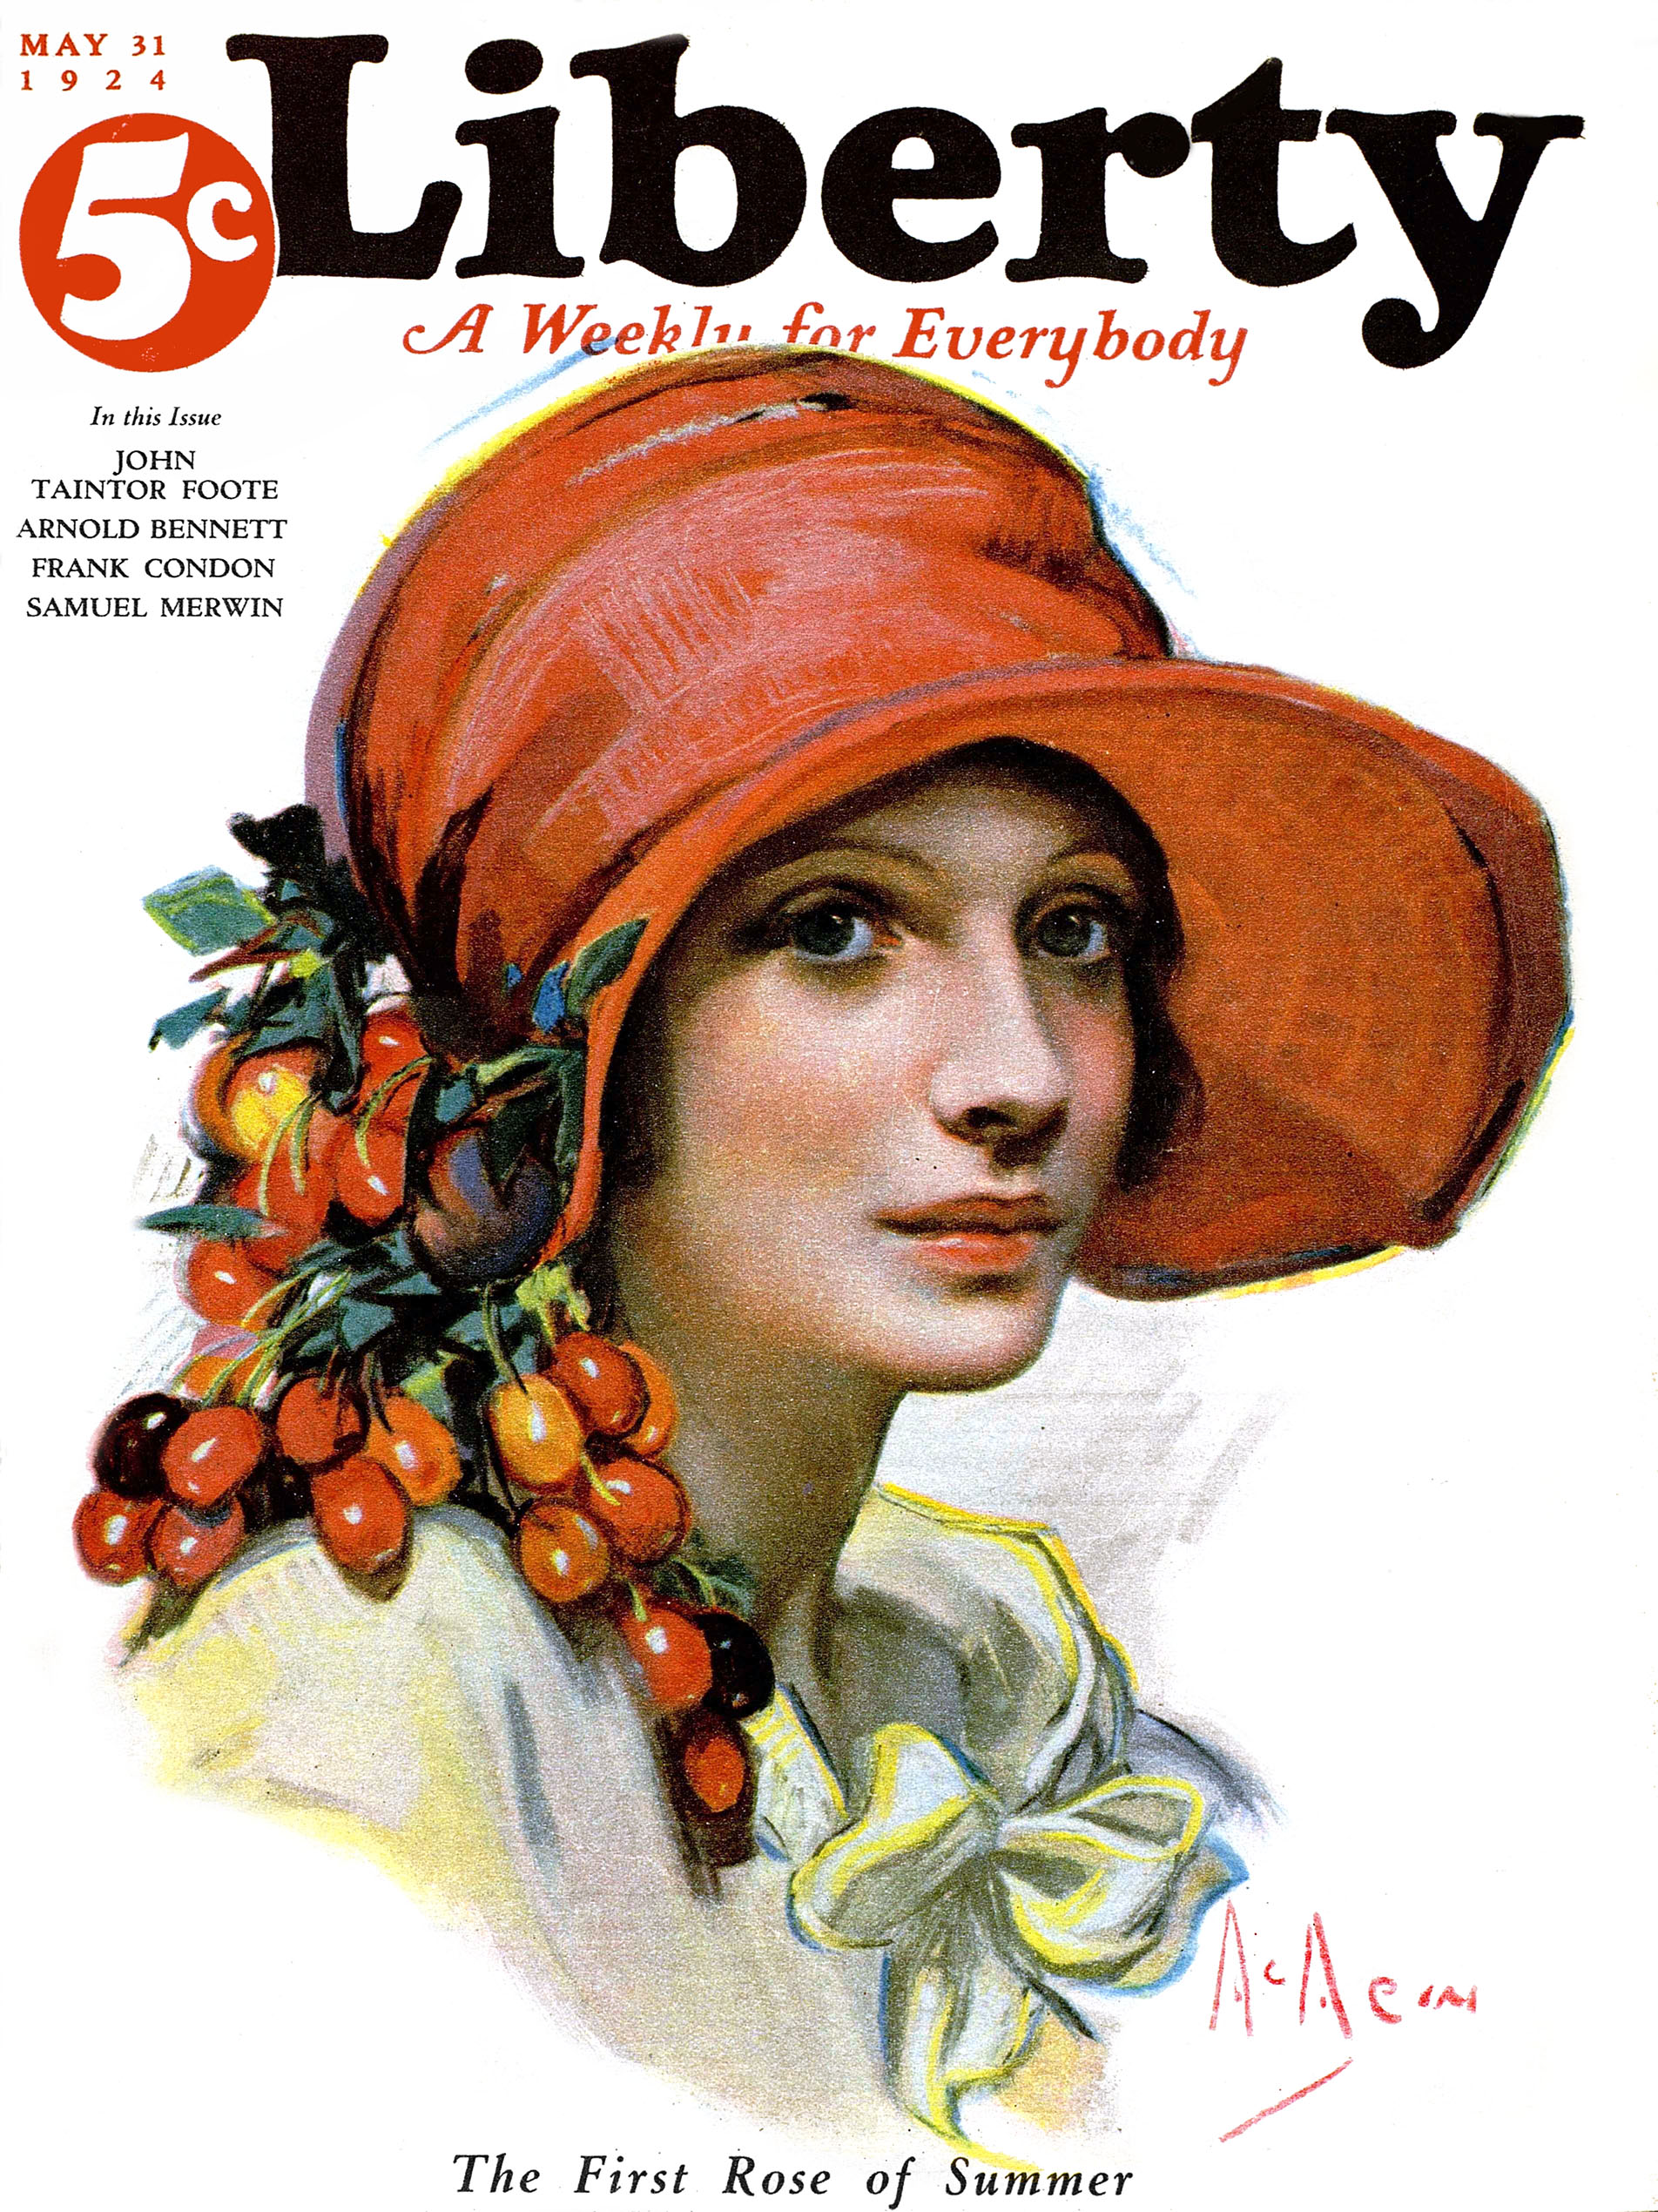 File:The First Rose of Summer, by Neysa McMein, Liberty 1924.jpg